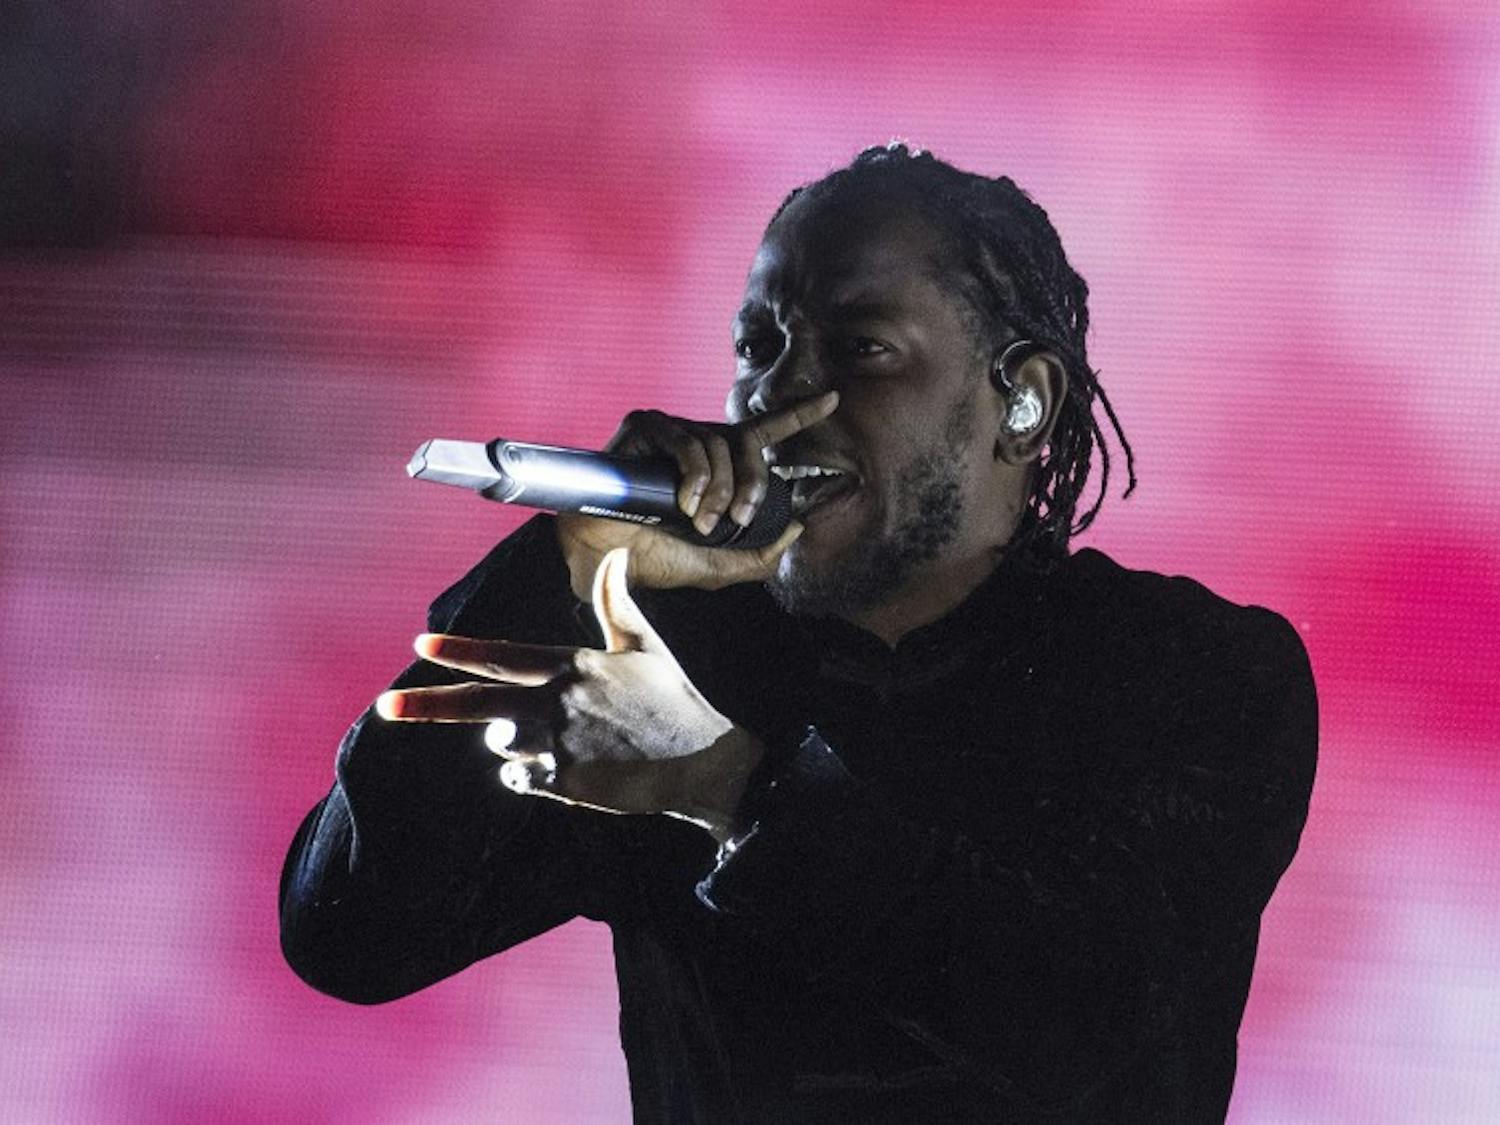 Kendrick Lamar, on stage at the Coachella Valley Music and Arts Festival in Indio, Calif., on April 23, 2017. Lamar won the 2018 Pulitzer Prize for music for his album "Damn." (Brian van der Brug/Los Angeles Times/TNS)